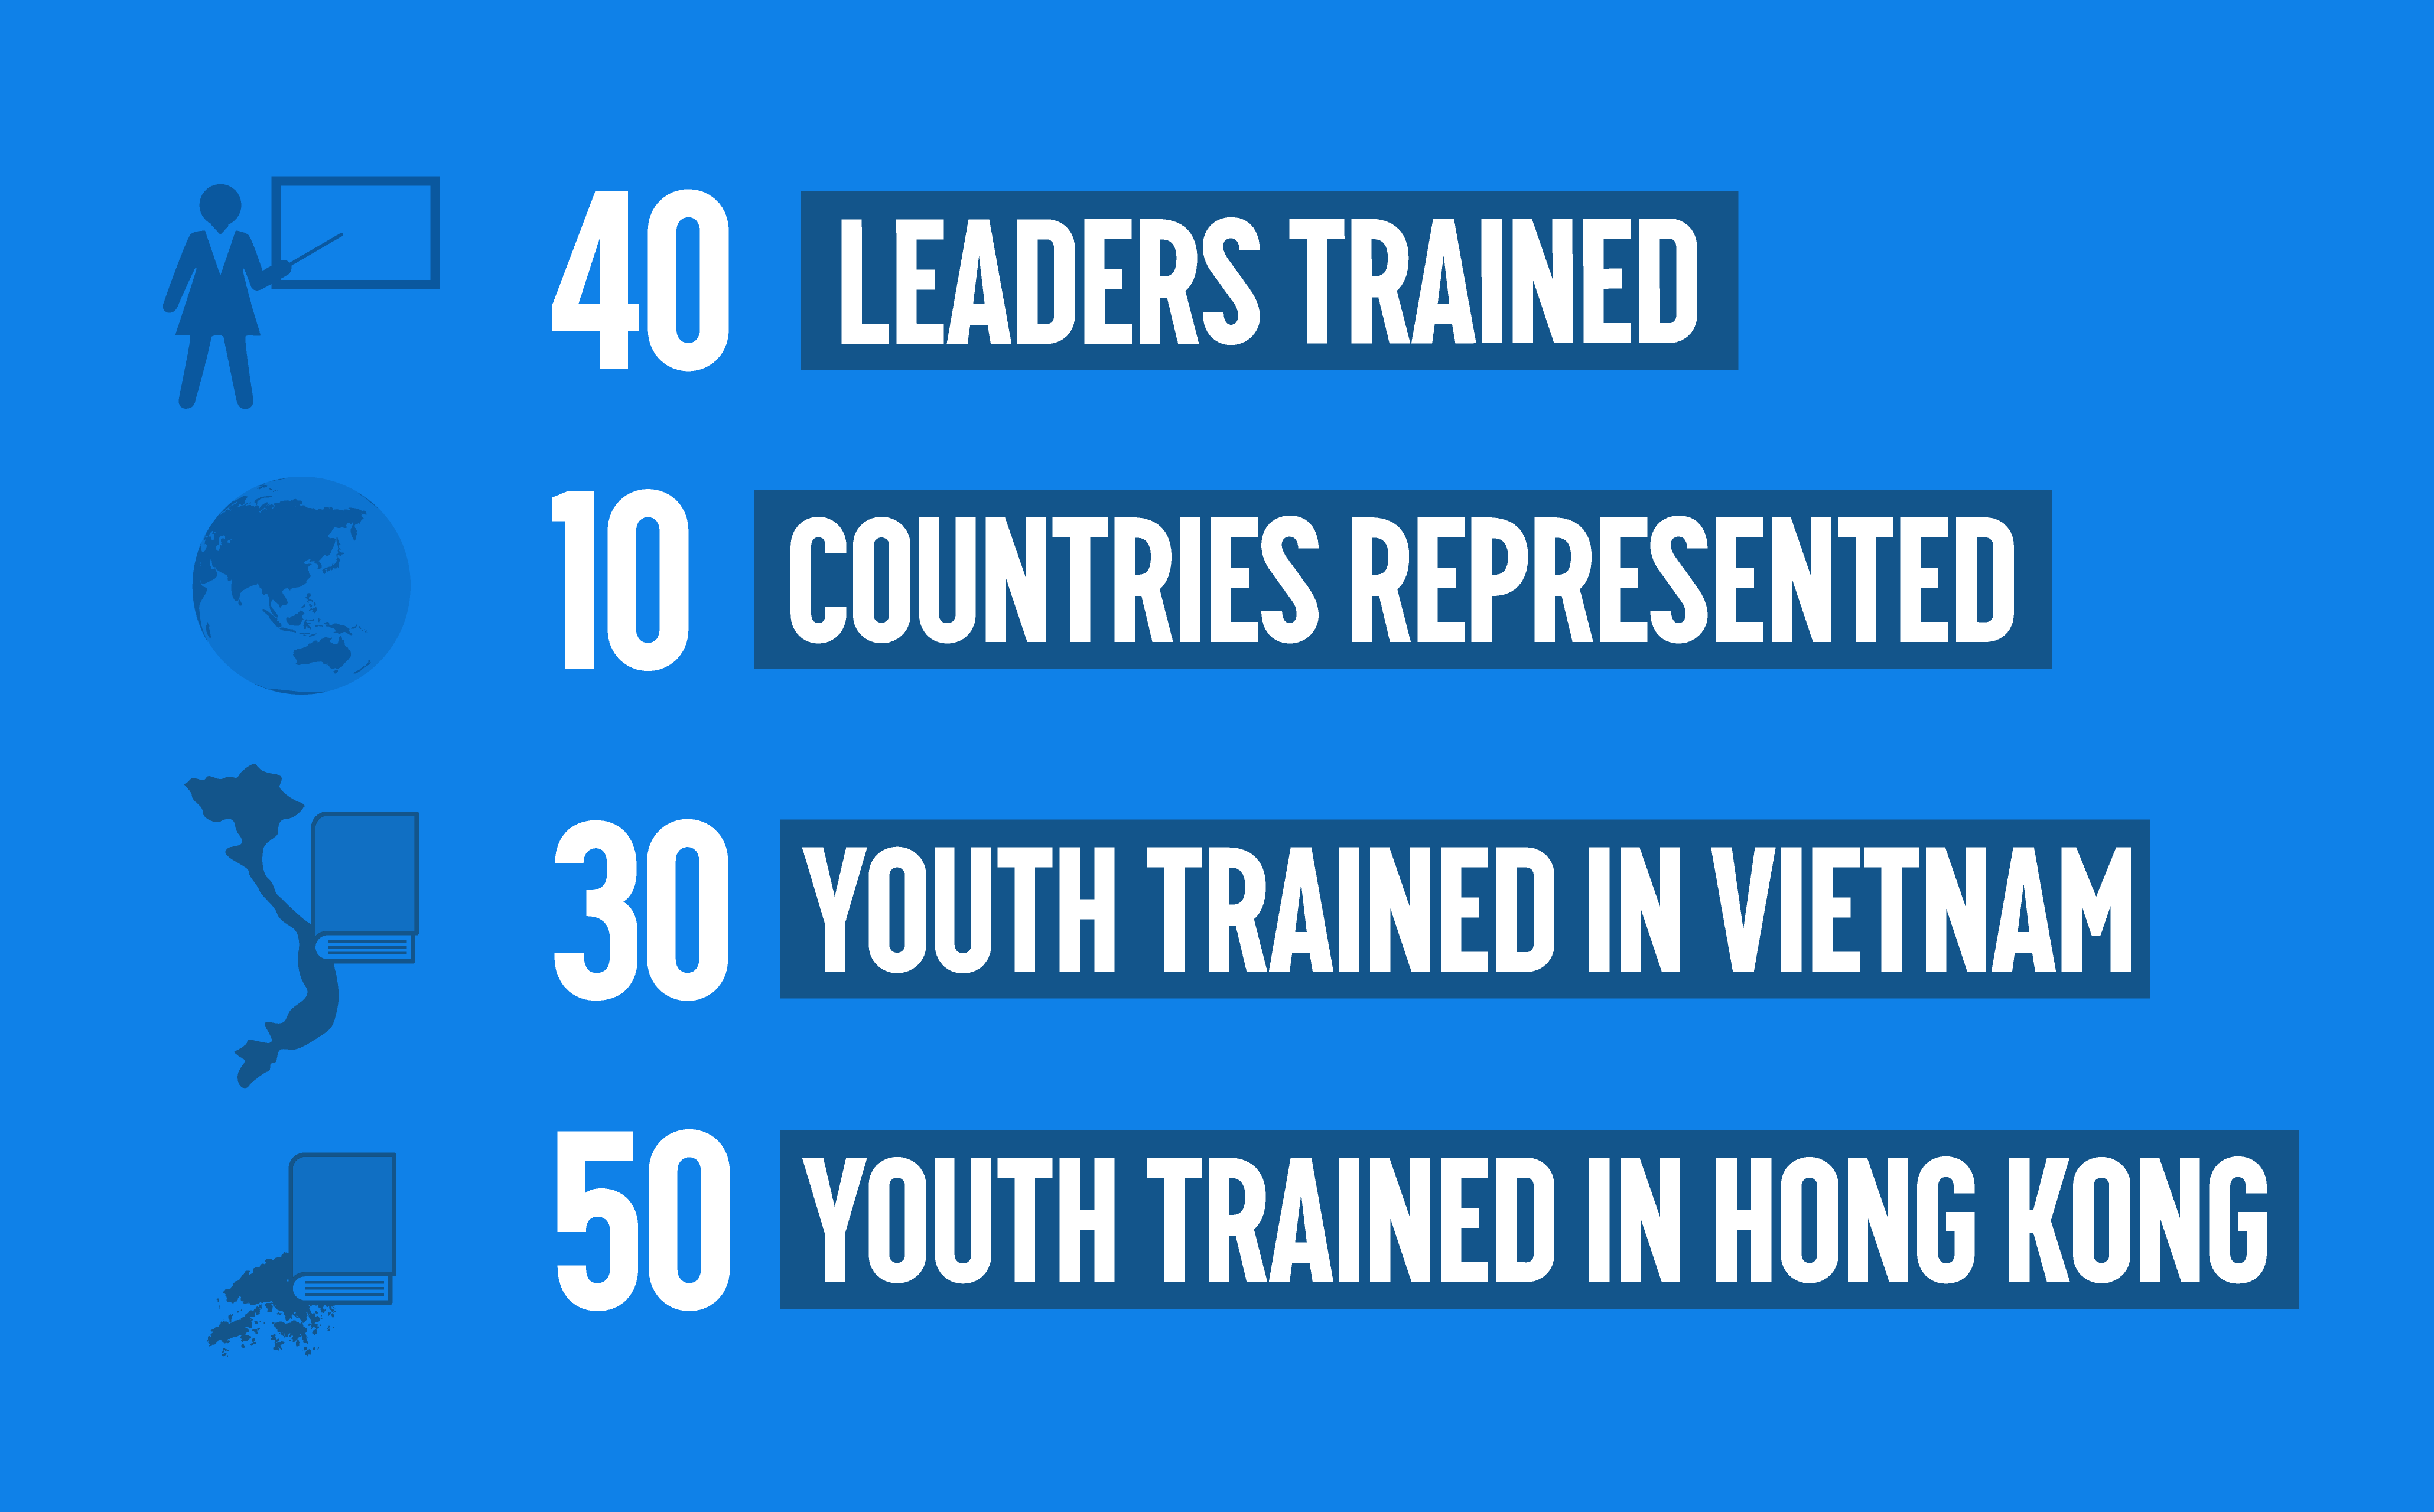 40 leaders trained, 10 countries represented, 30 youth trained in Vietnam, 50 youth trained in Hong Kong